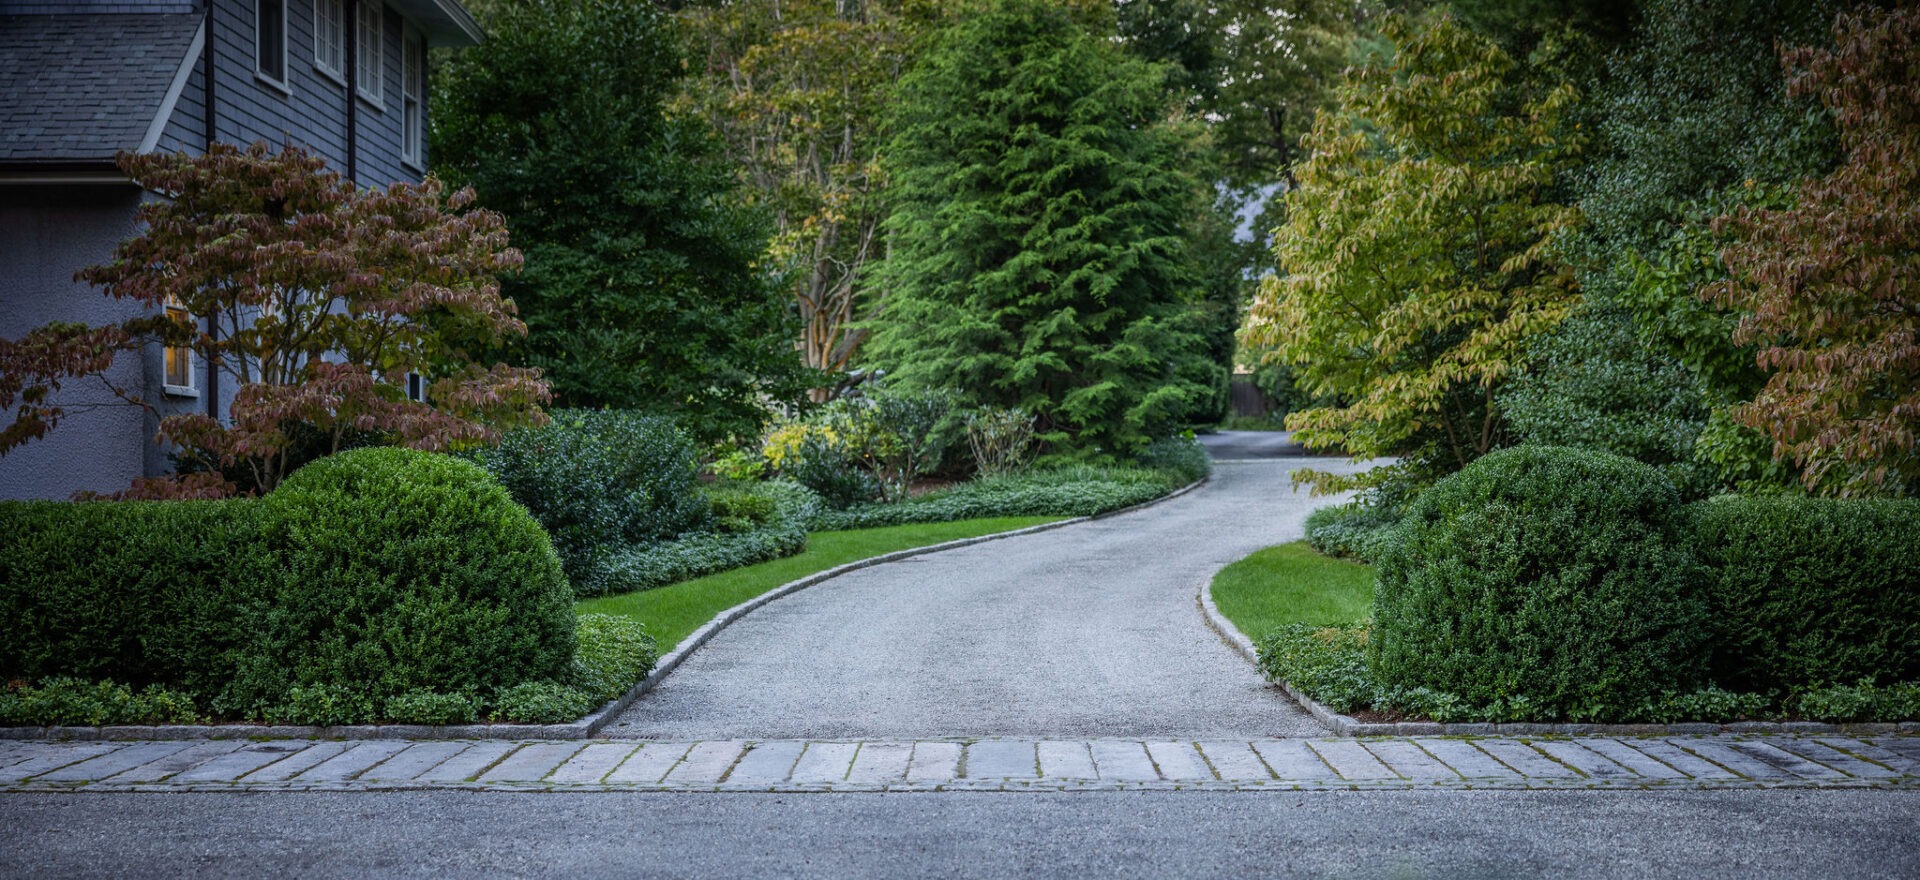 A winding cobblestone driveway leads through a well-manicured garden with trimmed hedges and trees beside a house's partial exterior.